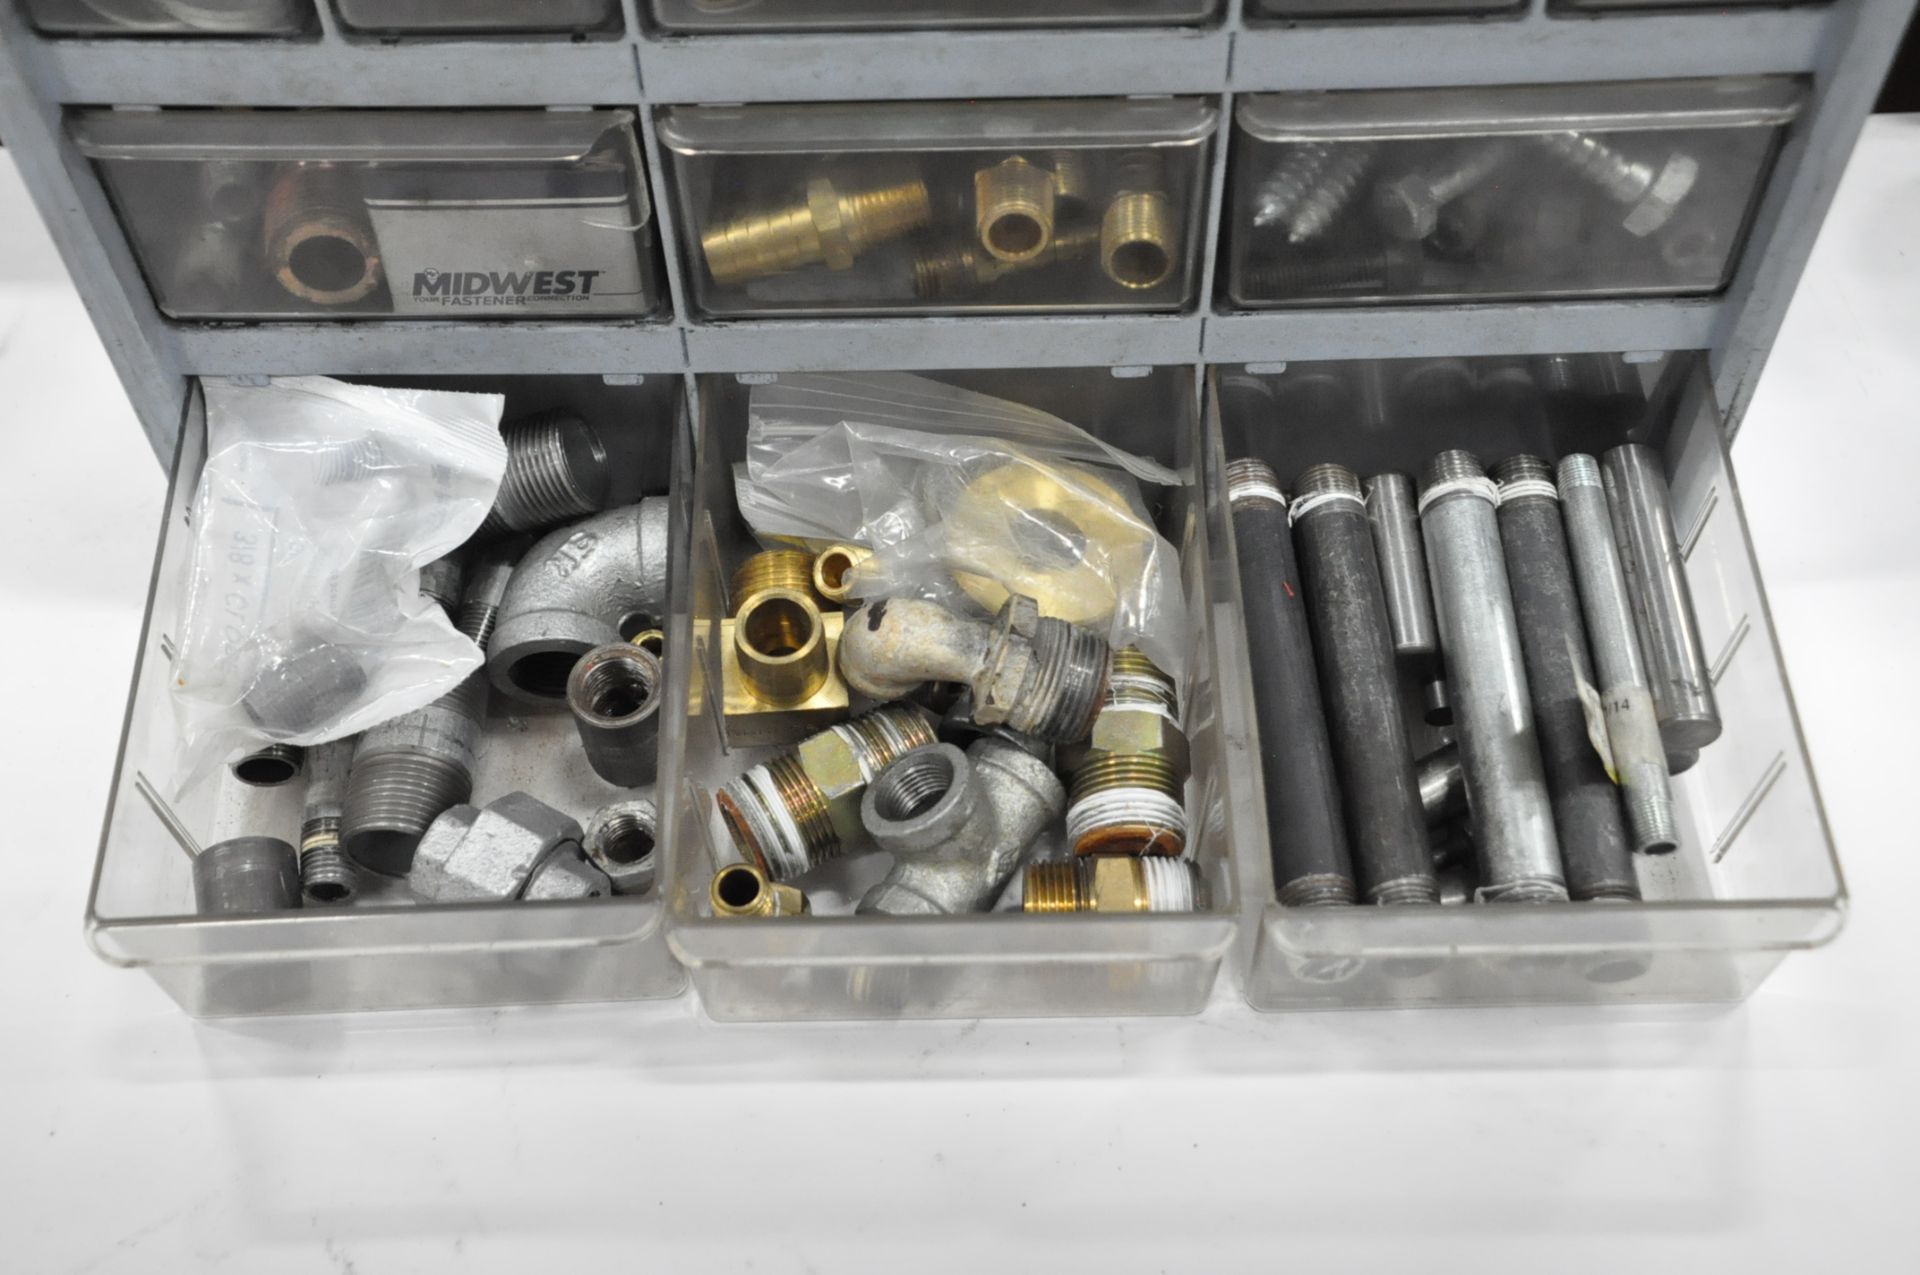 Organizer Bin Cabinet with Hydraulic Fittings Contents - Image 2 of 7